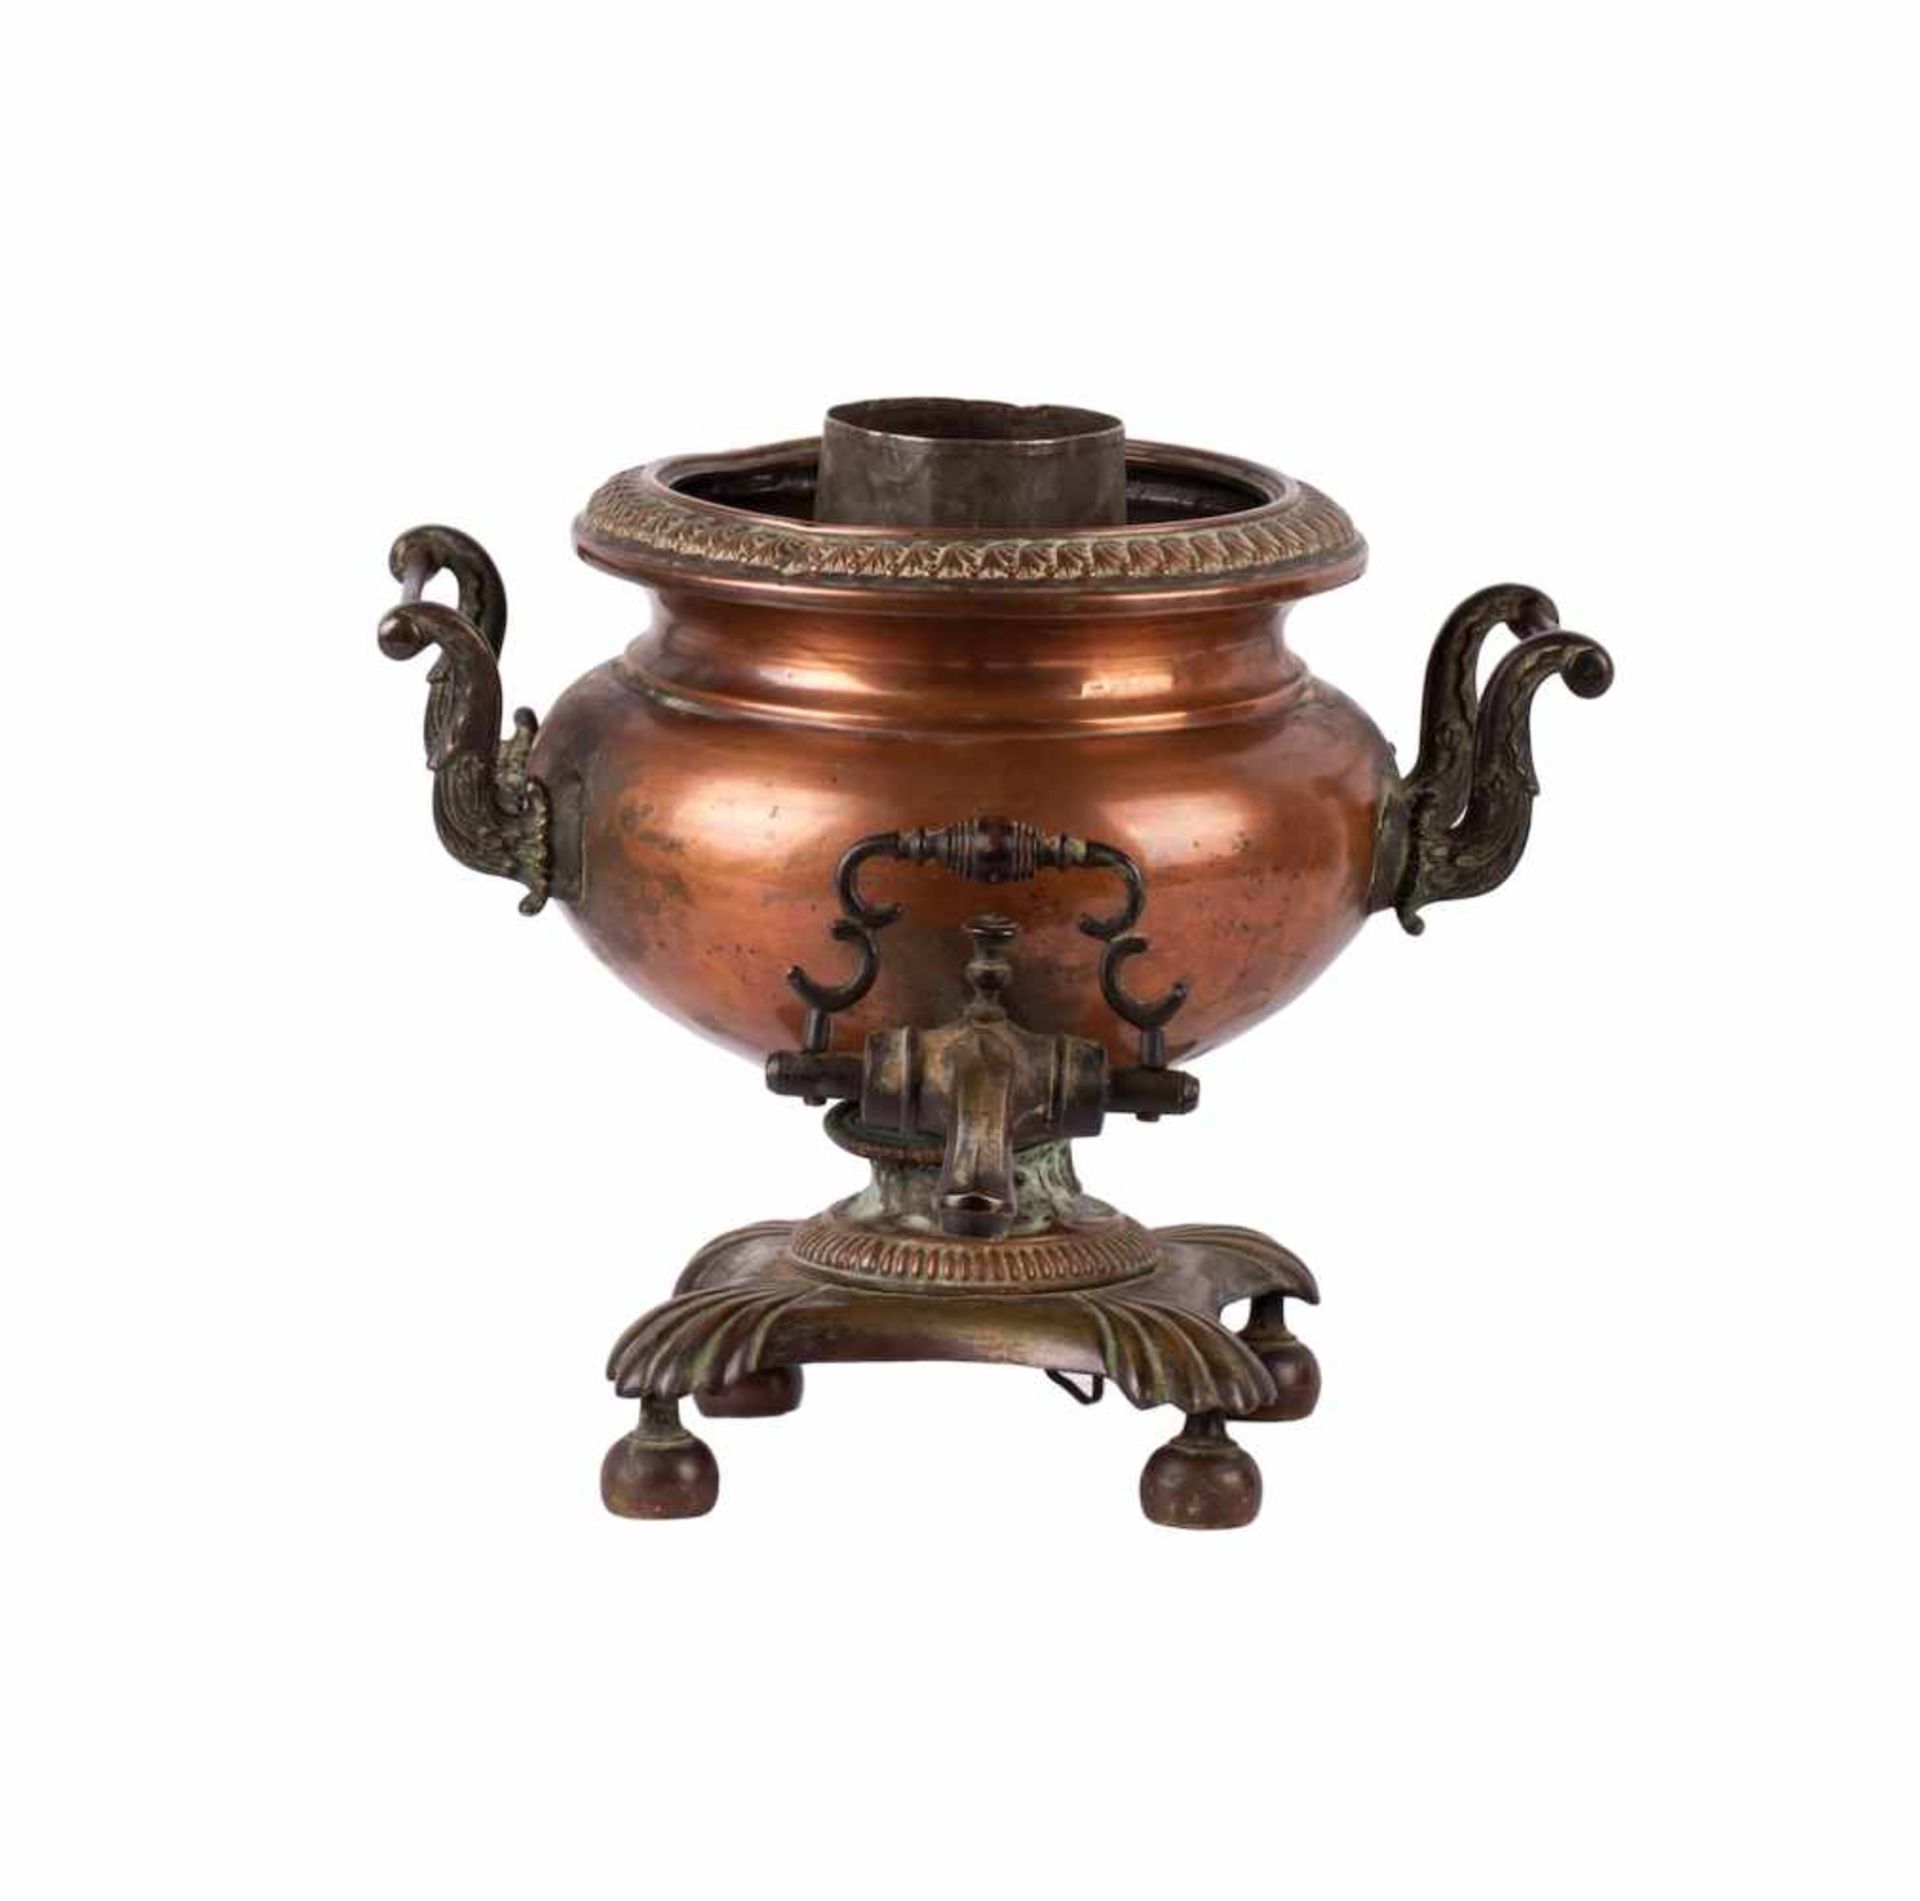 Small samovar in the shape of a vaseSmall samovar in the shape of a vase. Copper, cast, chasing,